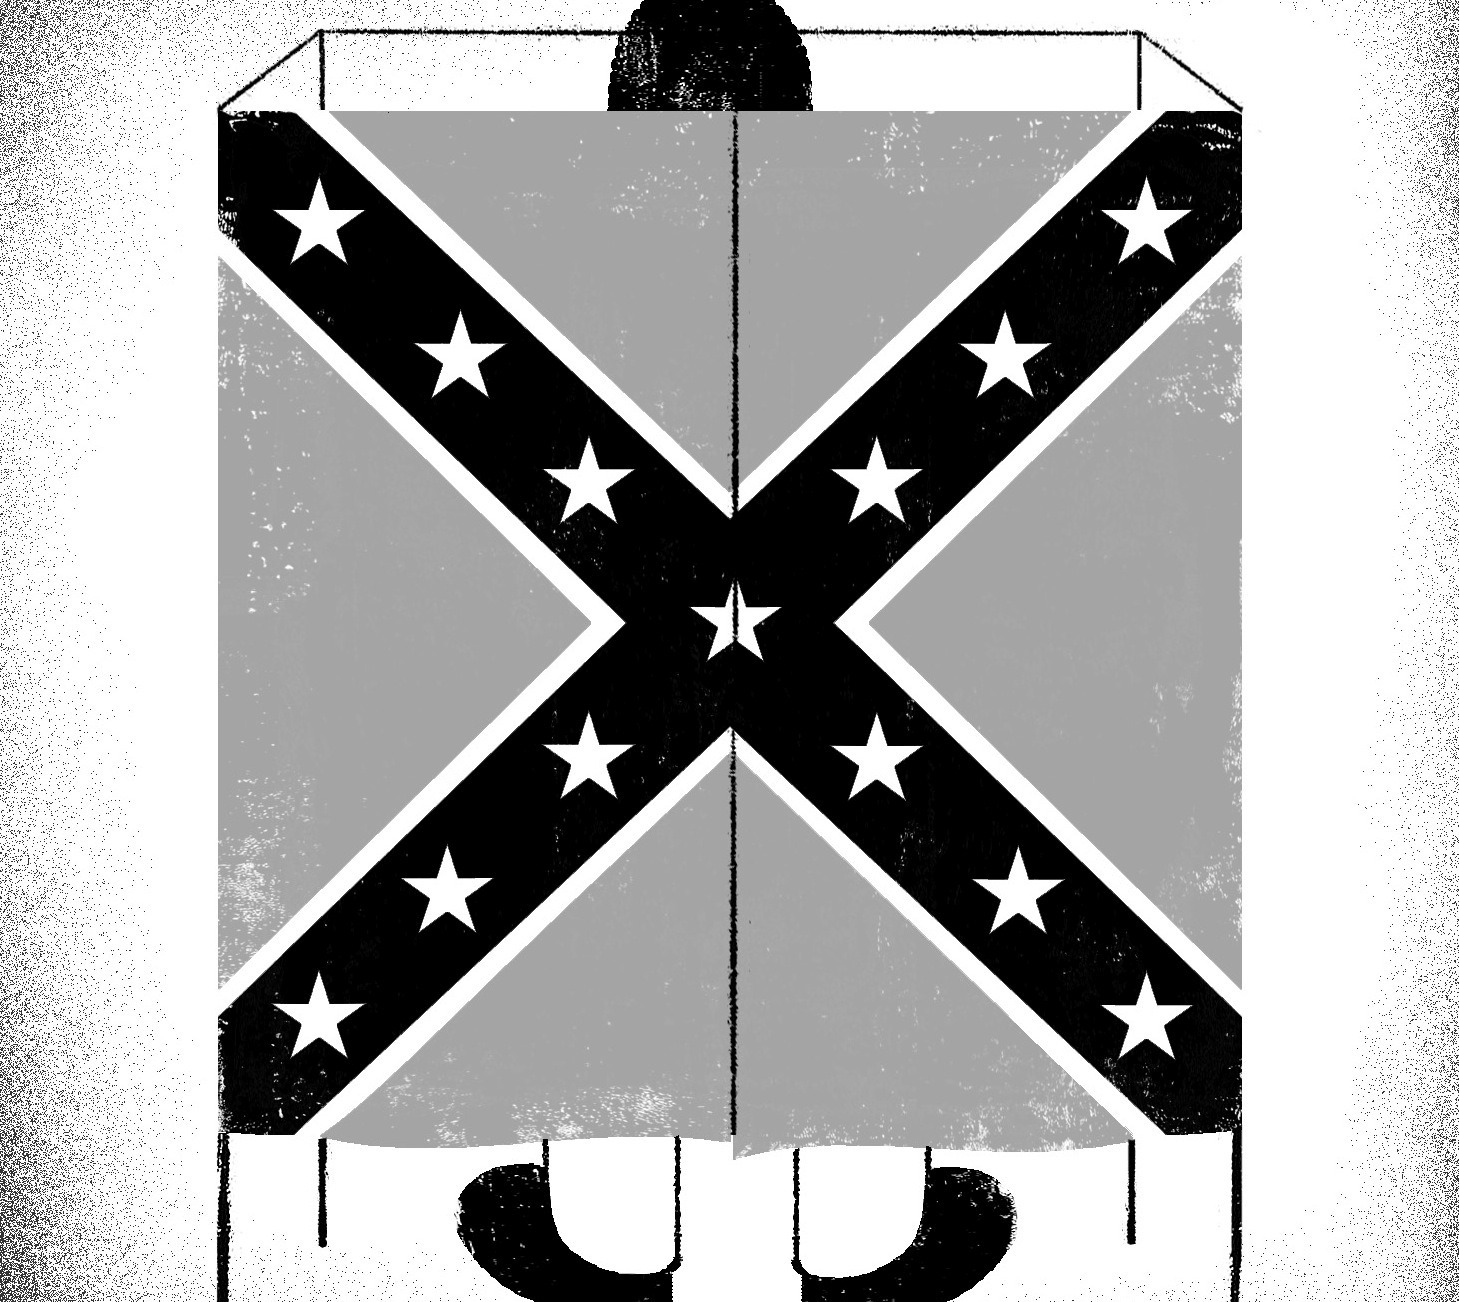 Party of Lincoln Takes Aim at Black Voters